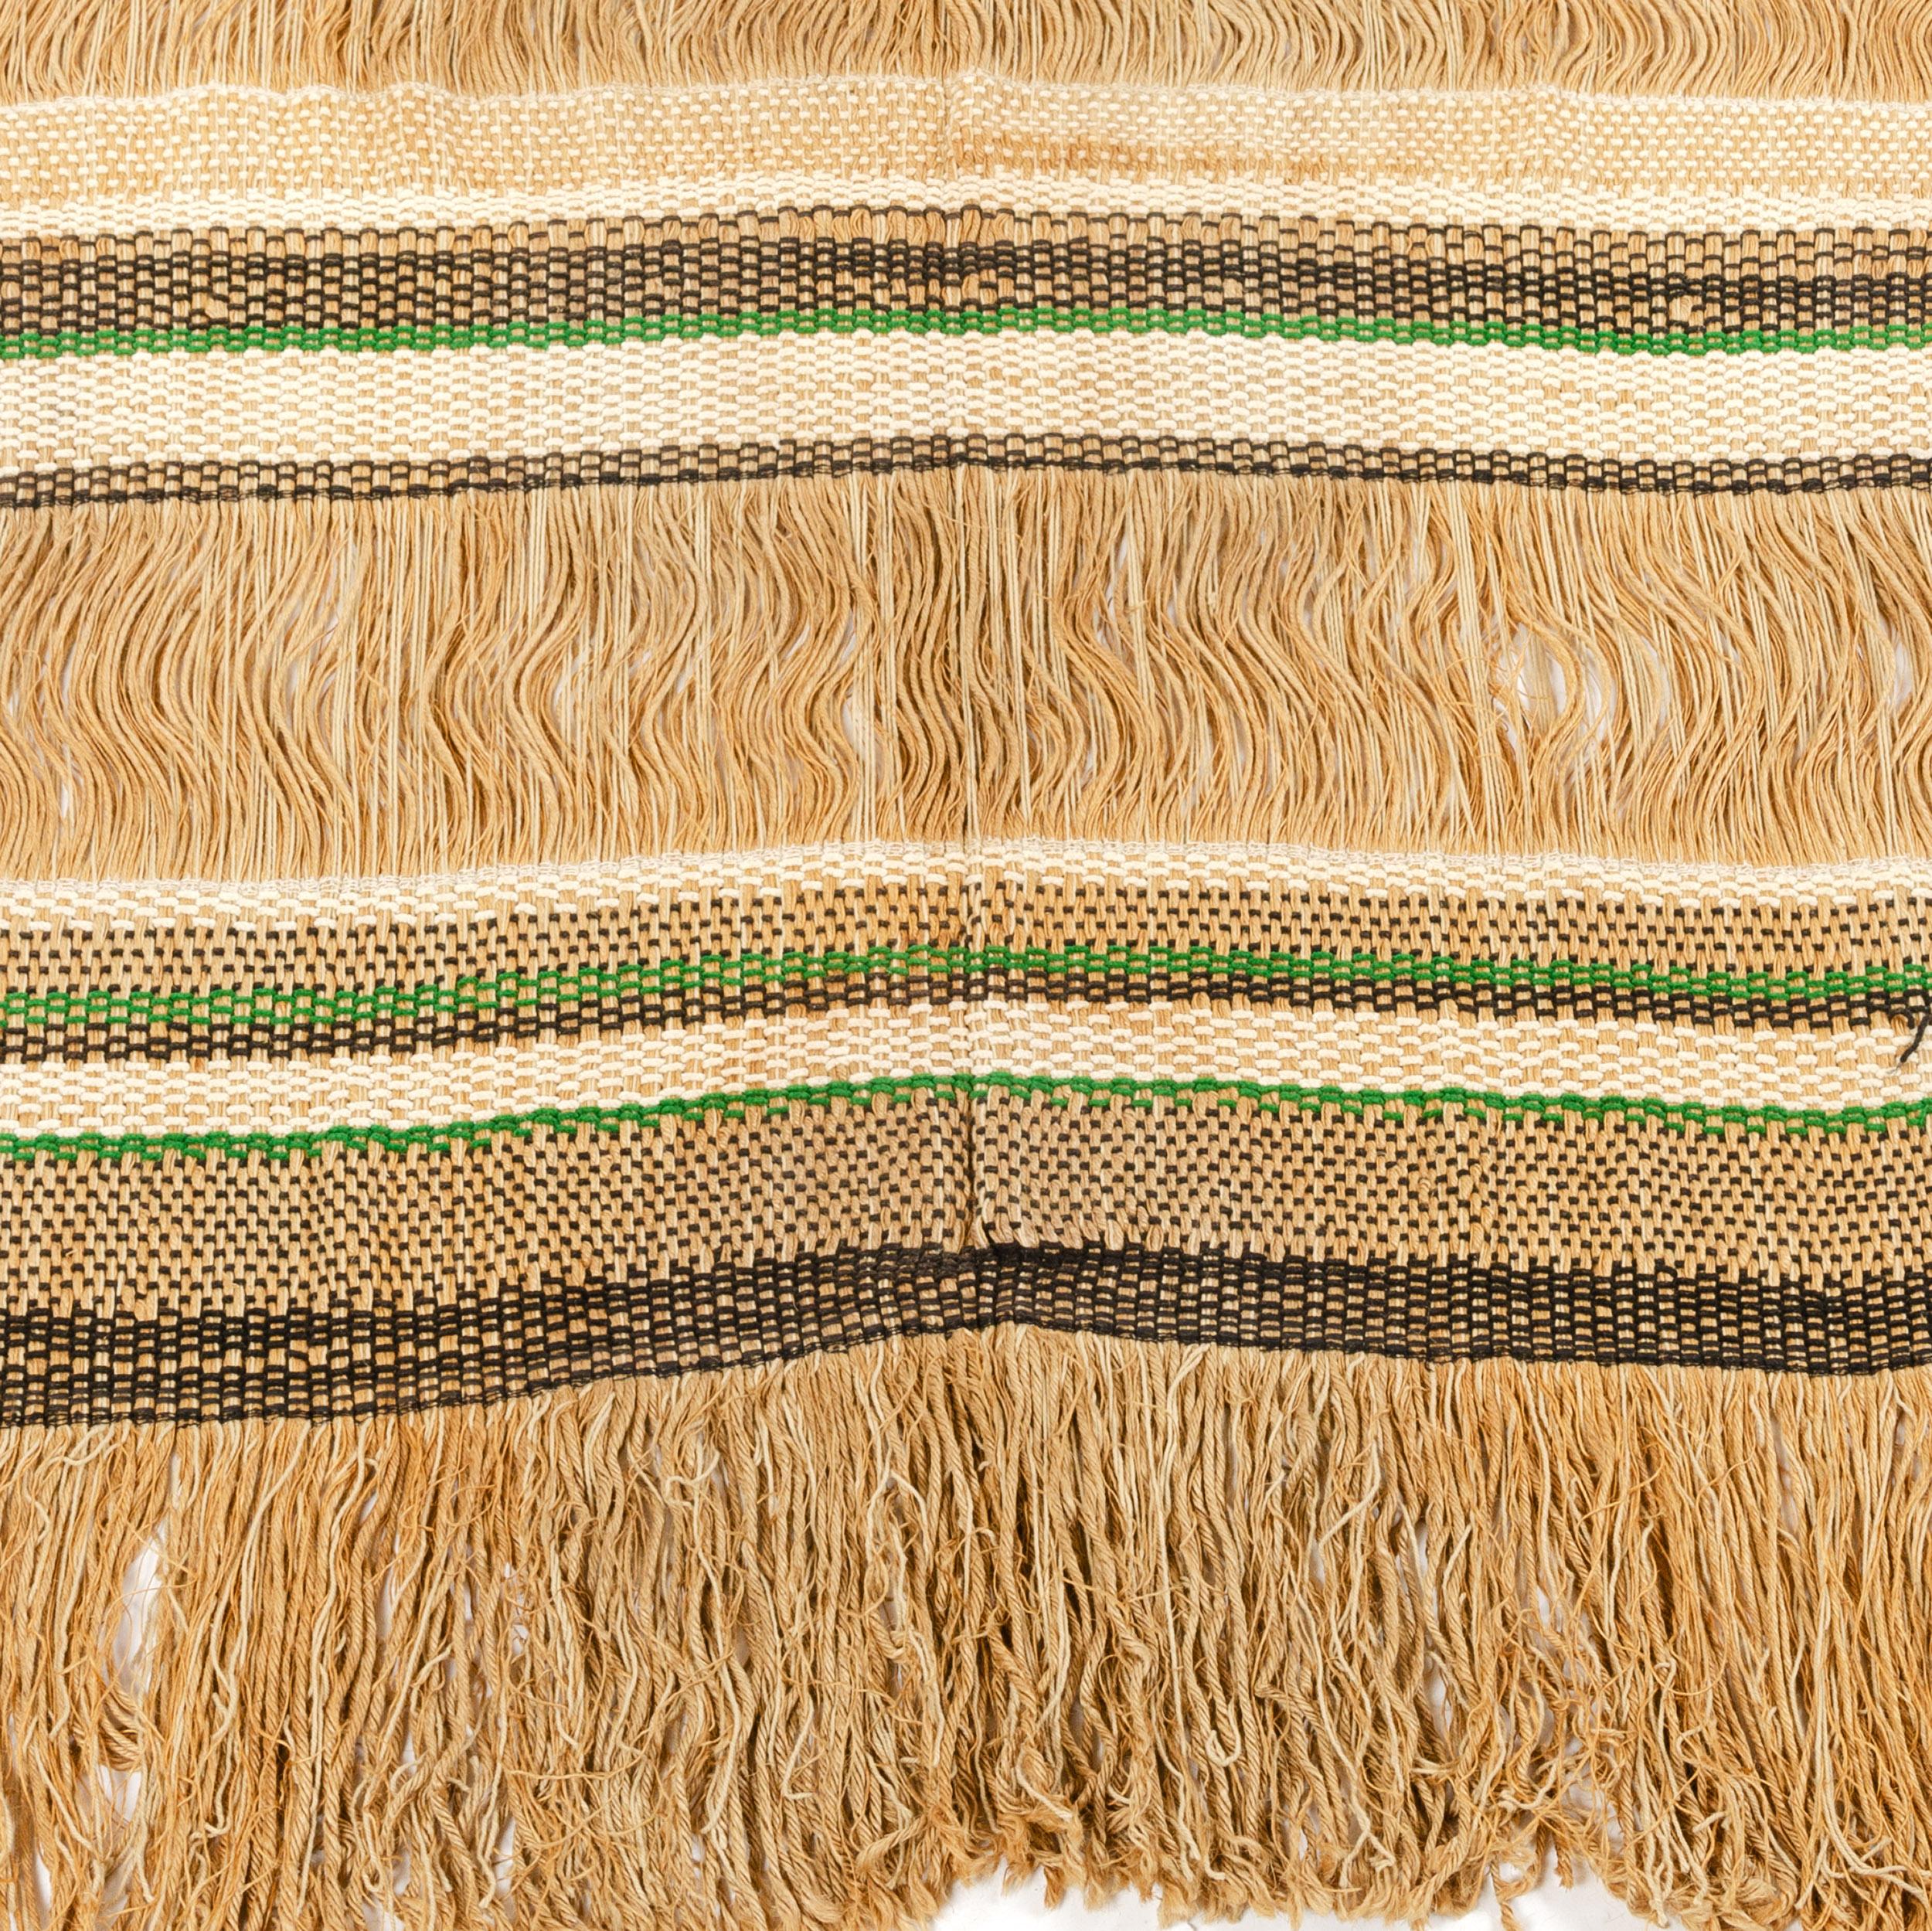 A Mid-Century Modern tapestry of woven jute and chenille in off-white, camel, dark brown and vibrant green. Model '9001' with original tag. Made in the USA, 1950s.